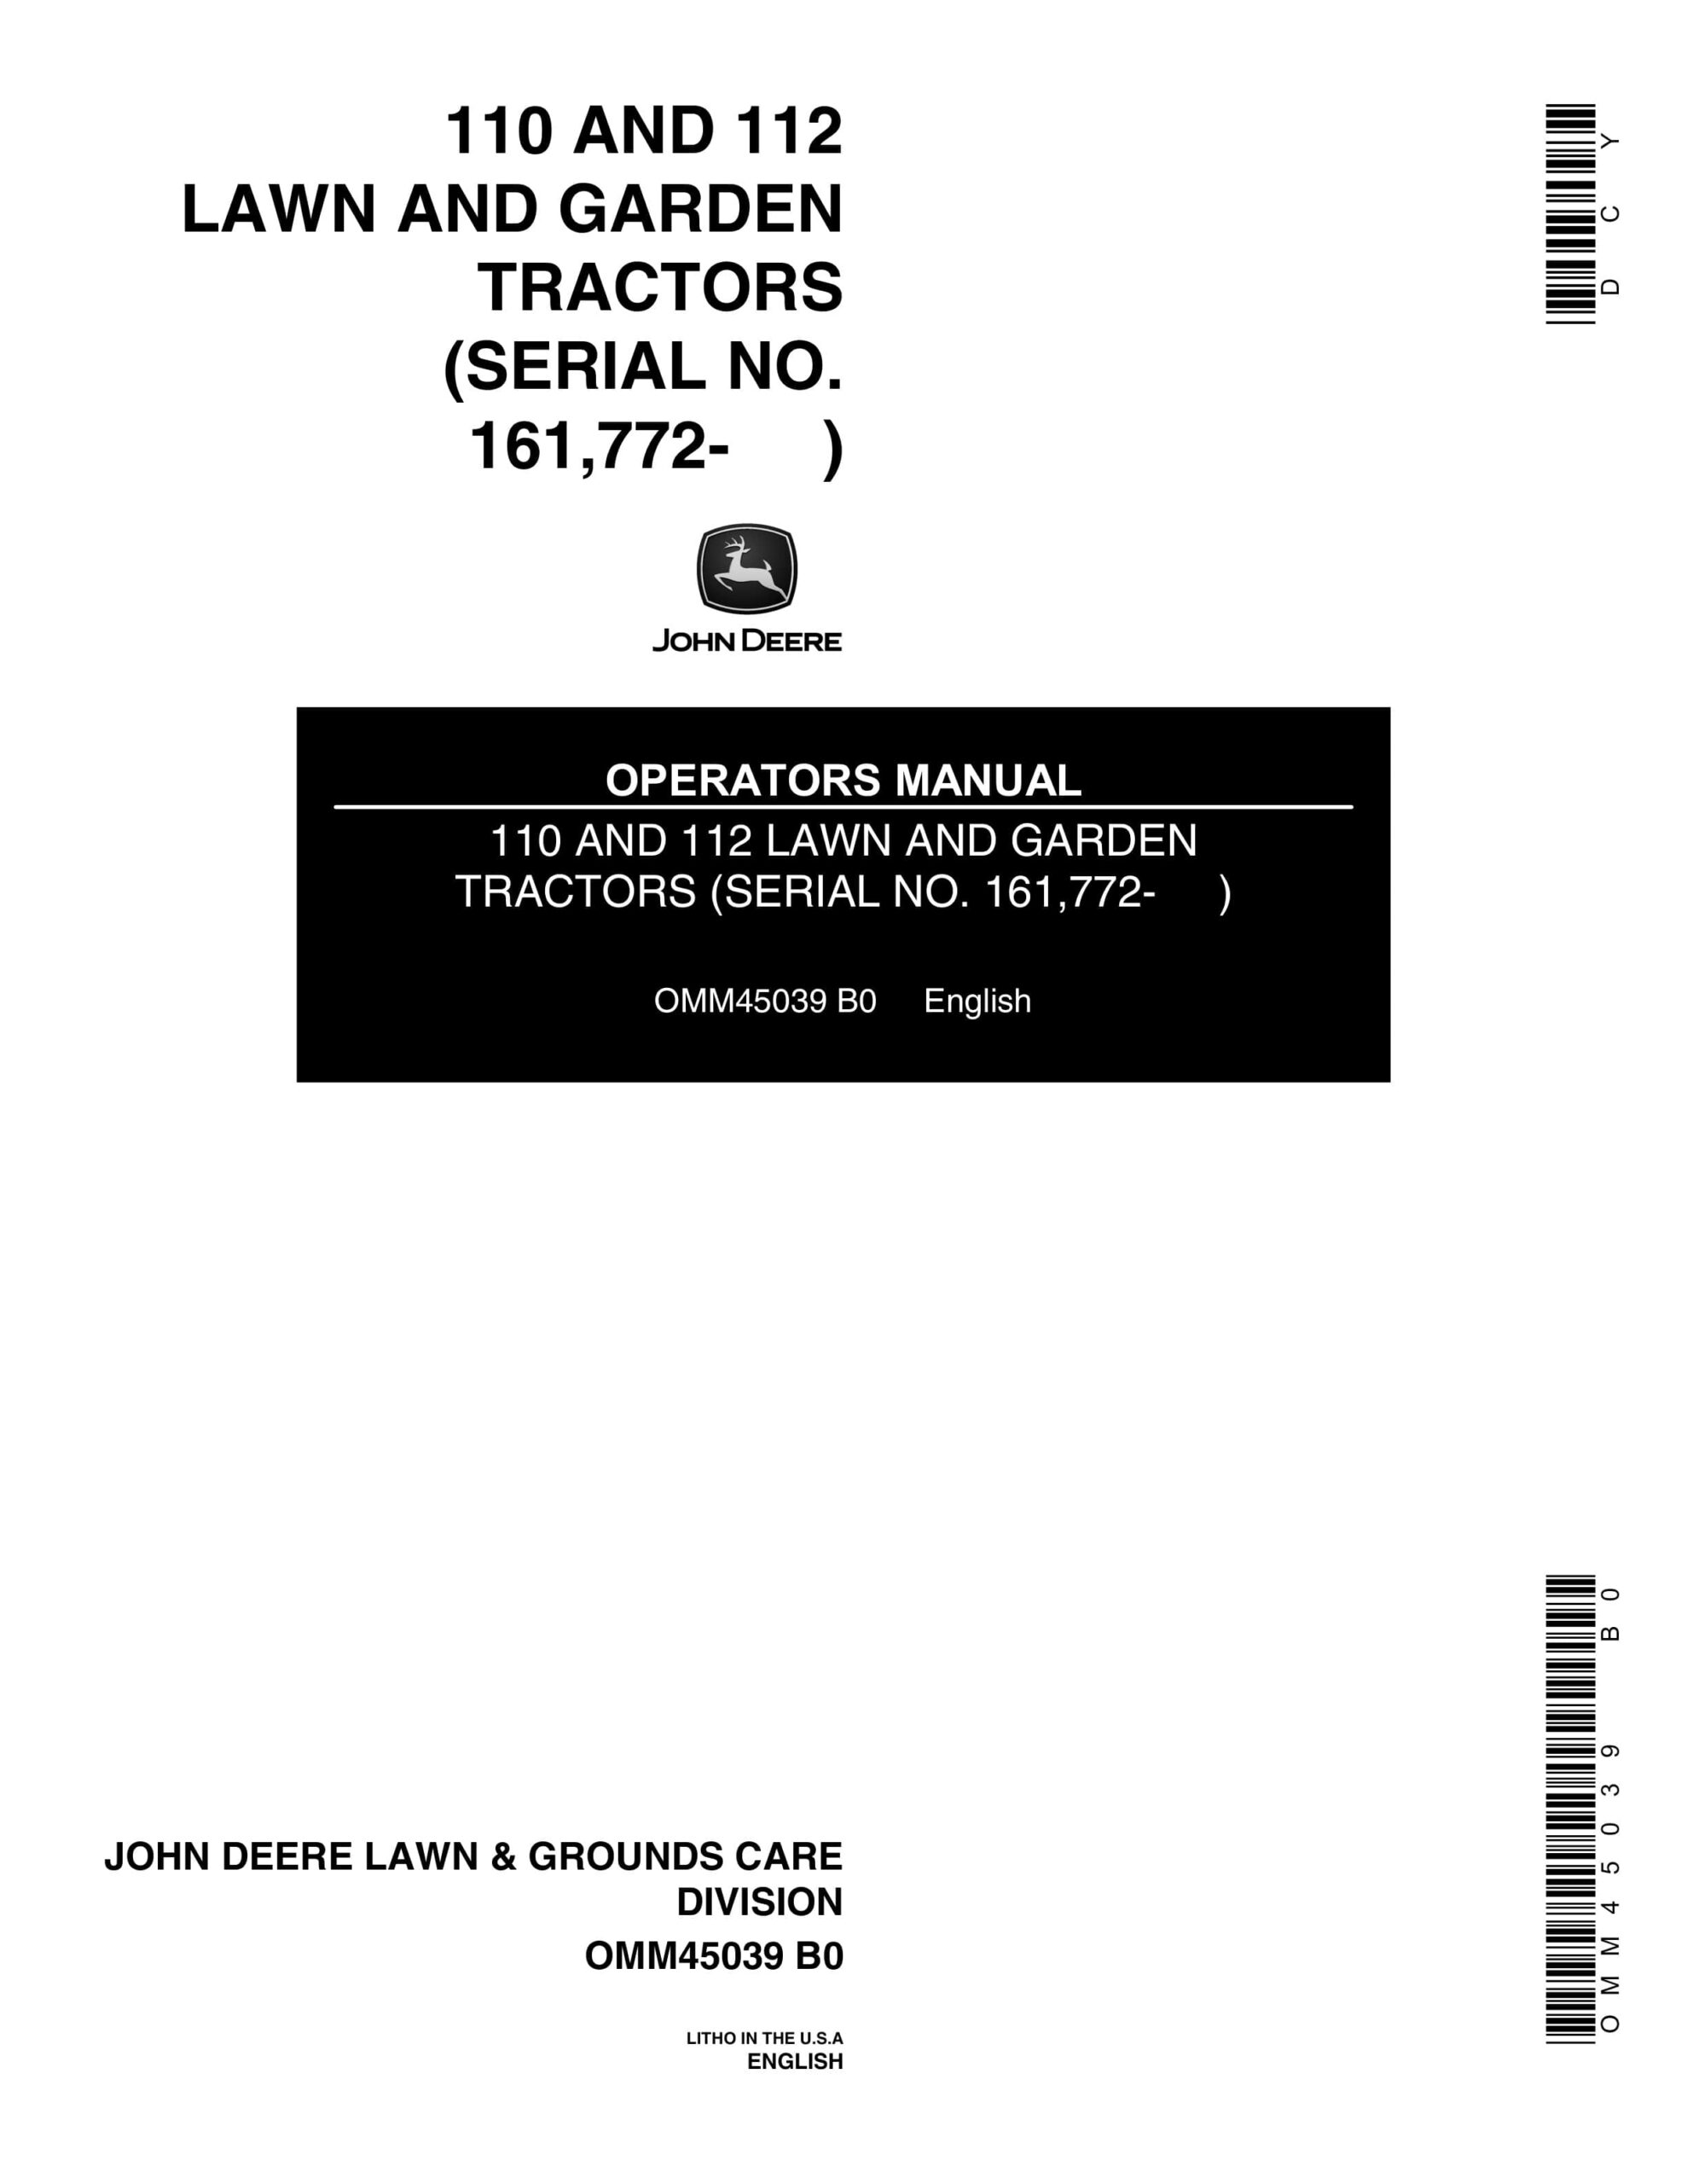 John Deere 110 AND 112 LAWN AND GARDEN TRACTORS Operator Manual OMM45039-1